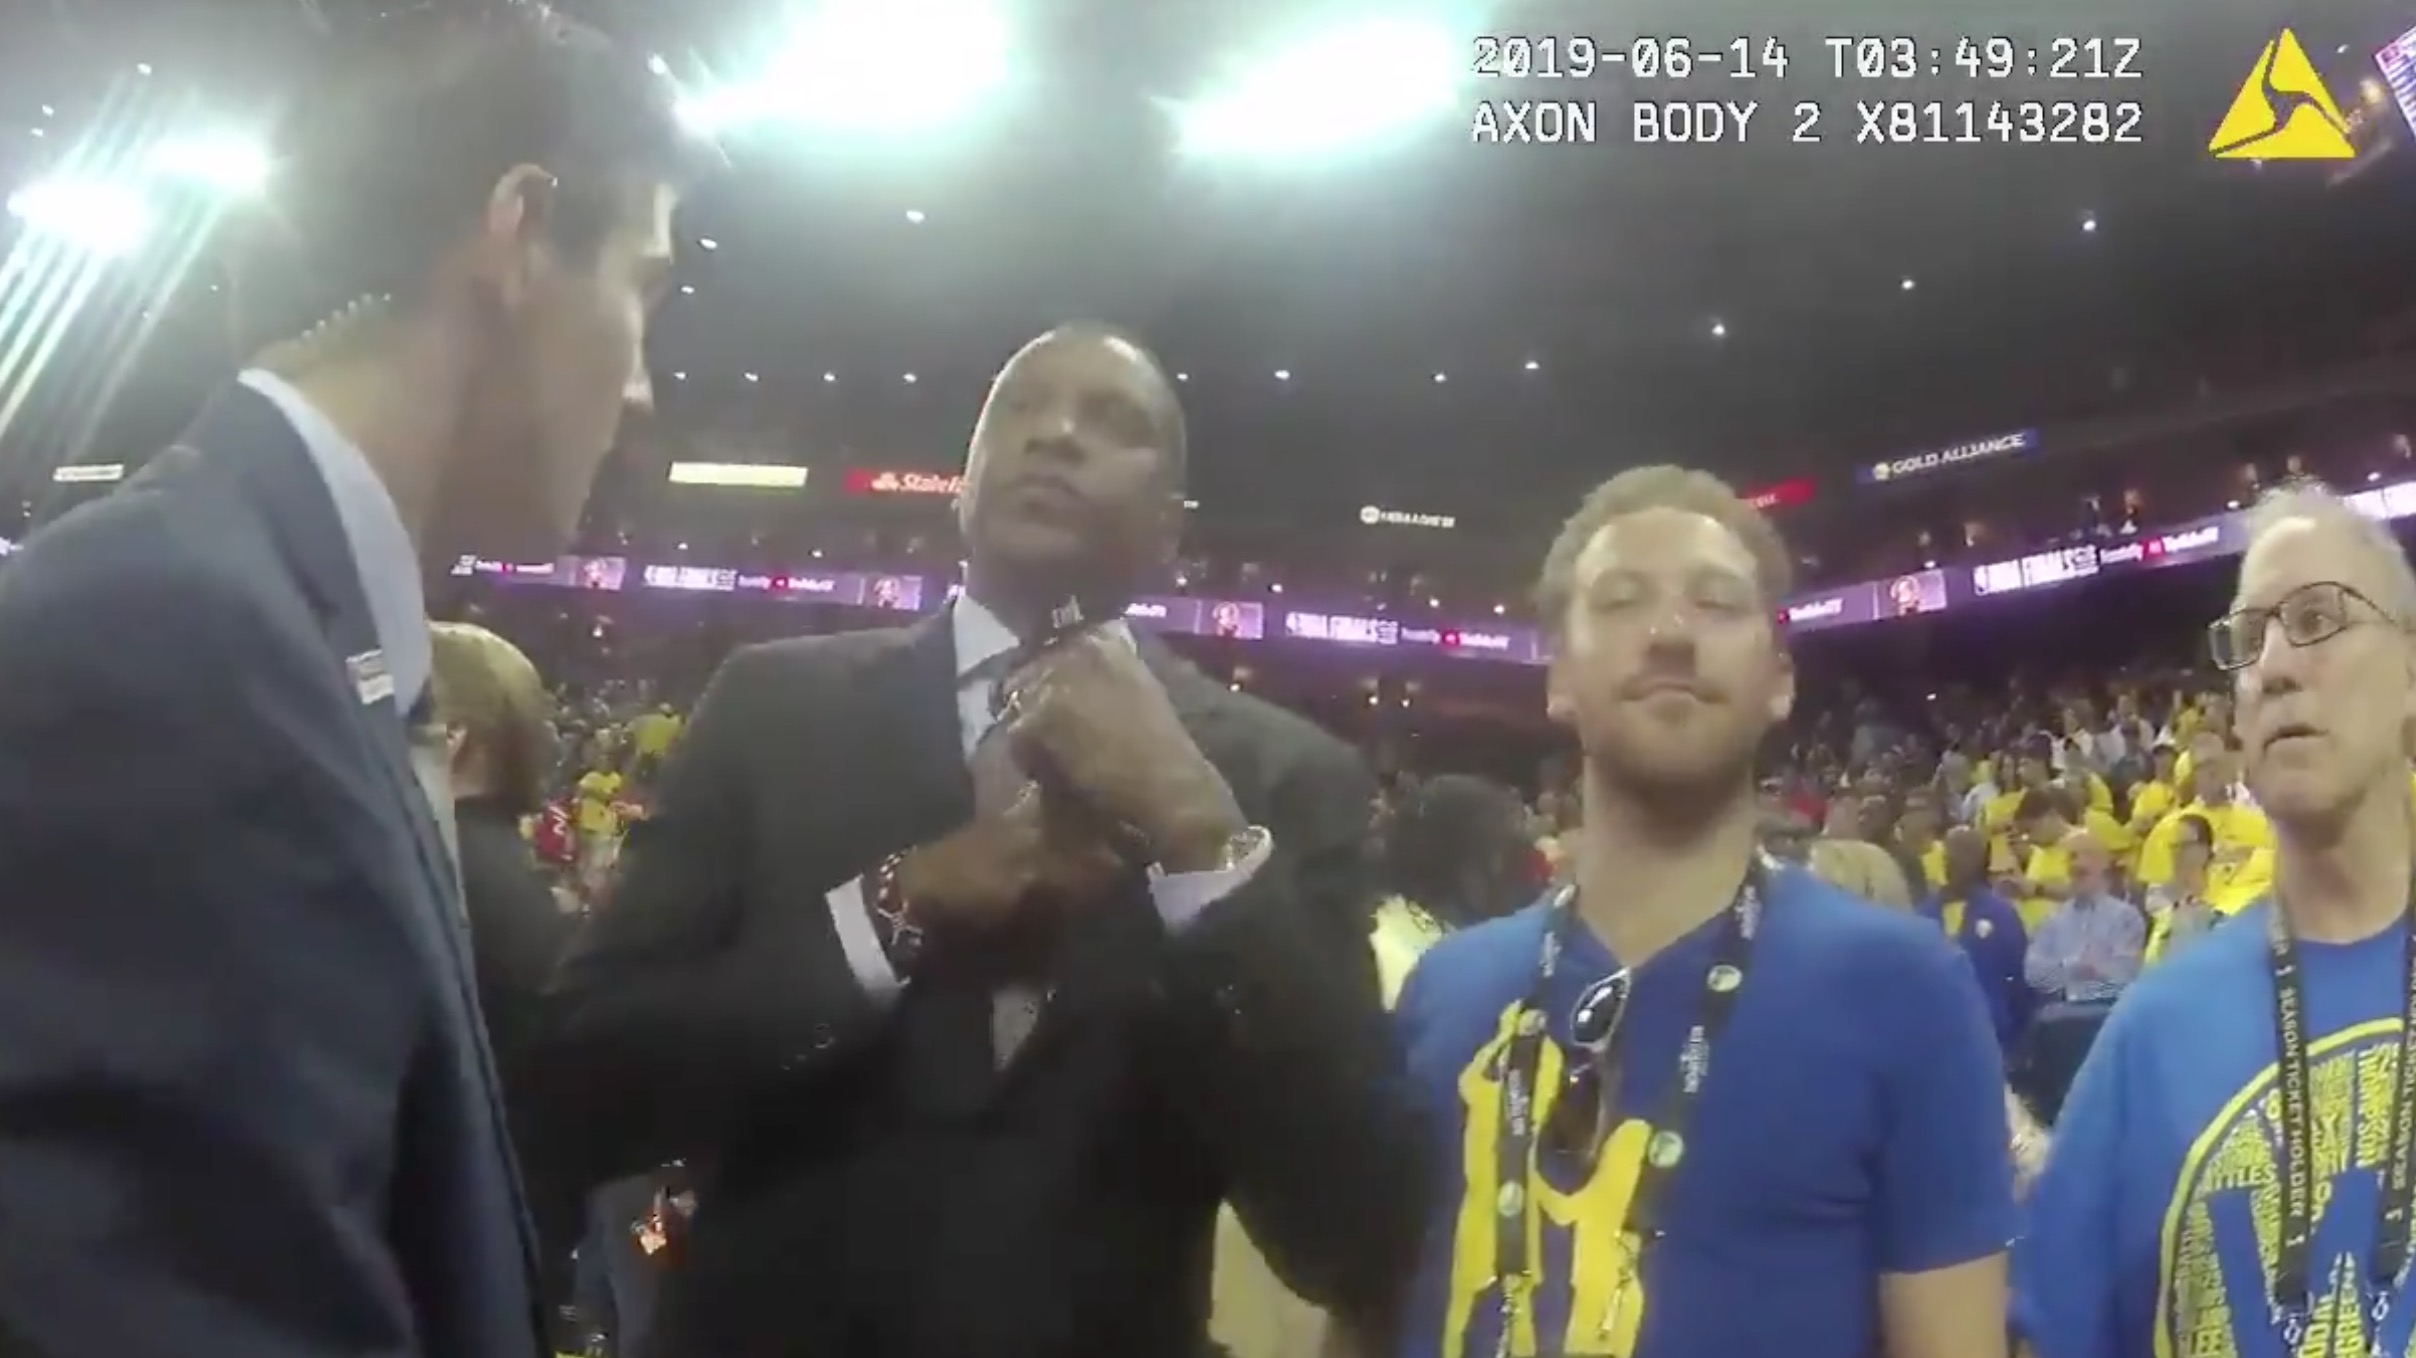 Masai Ujiri pulling out his credentials before being shoved.